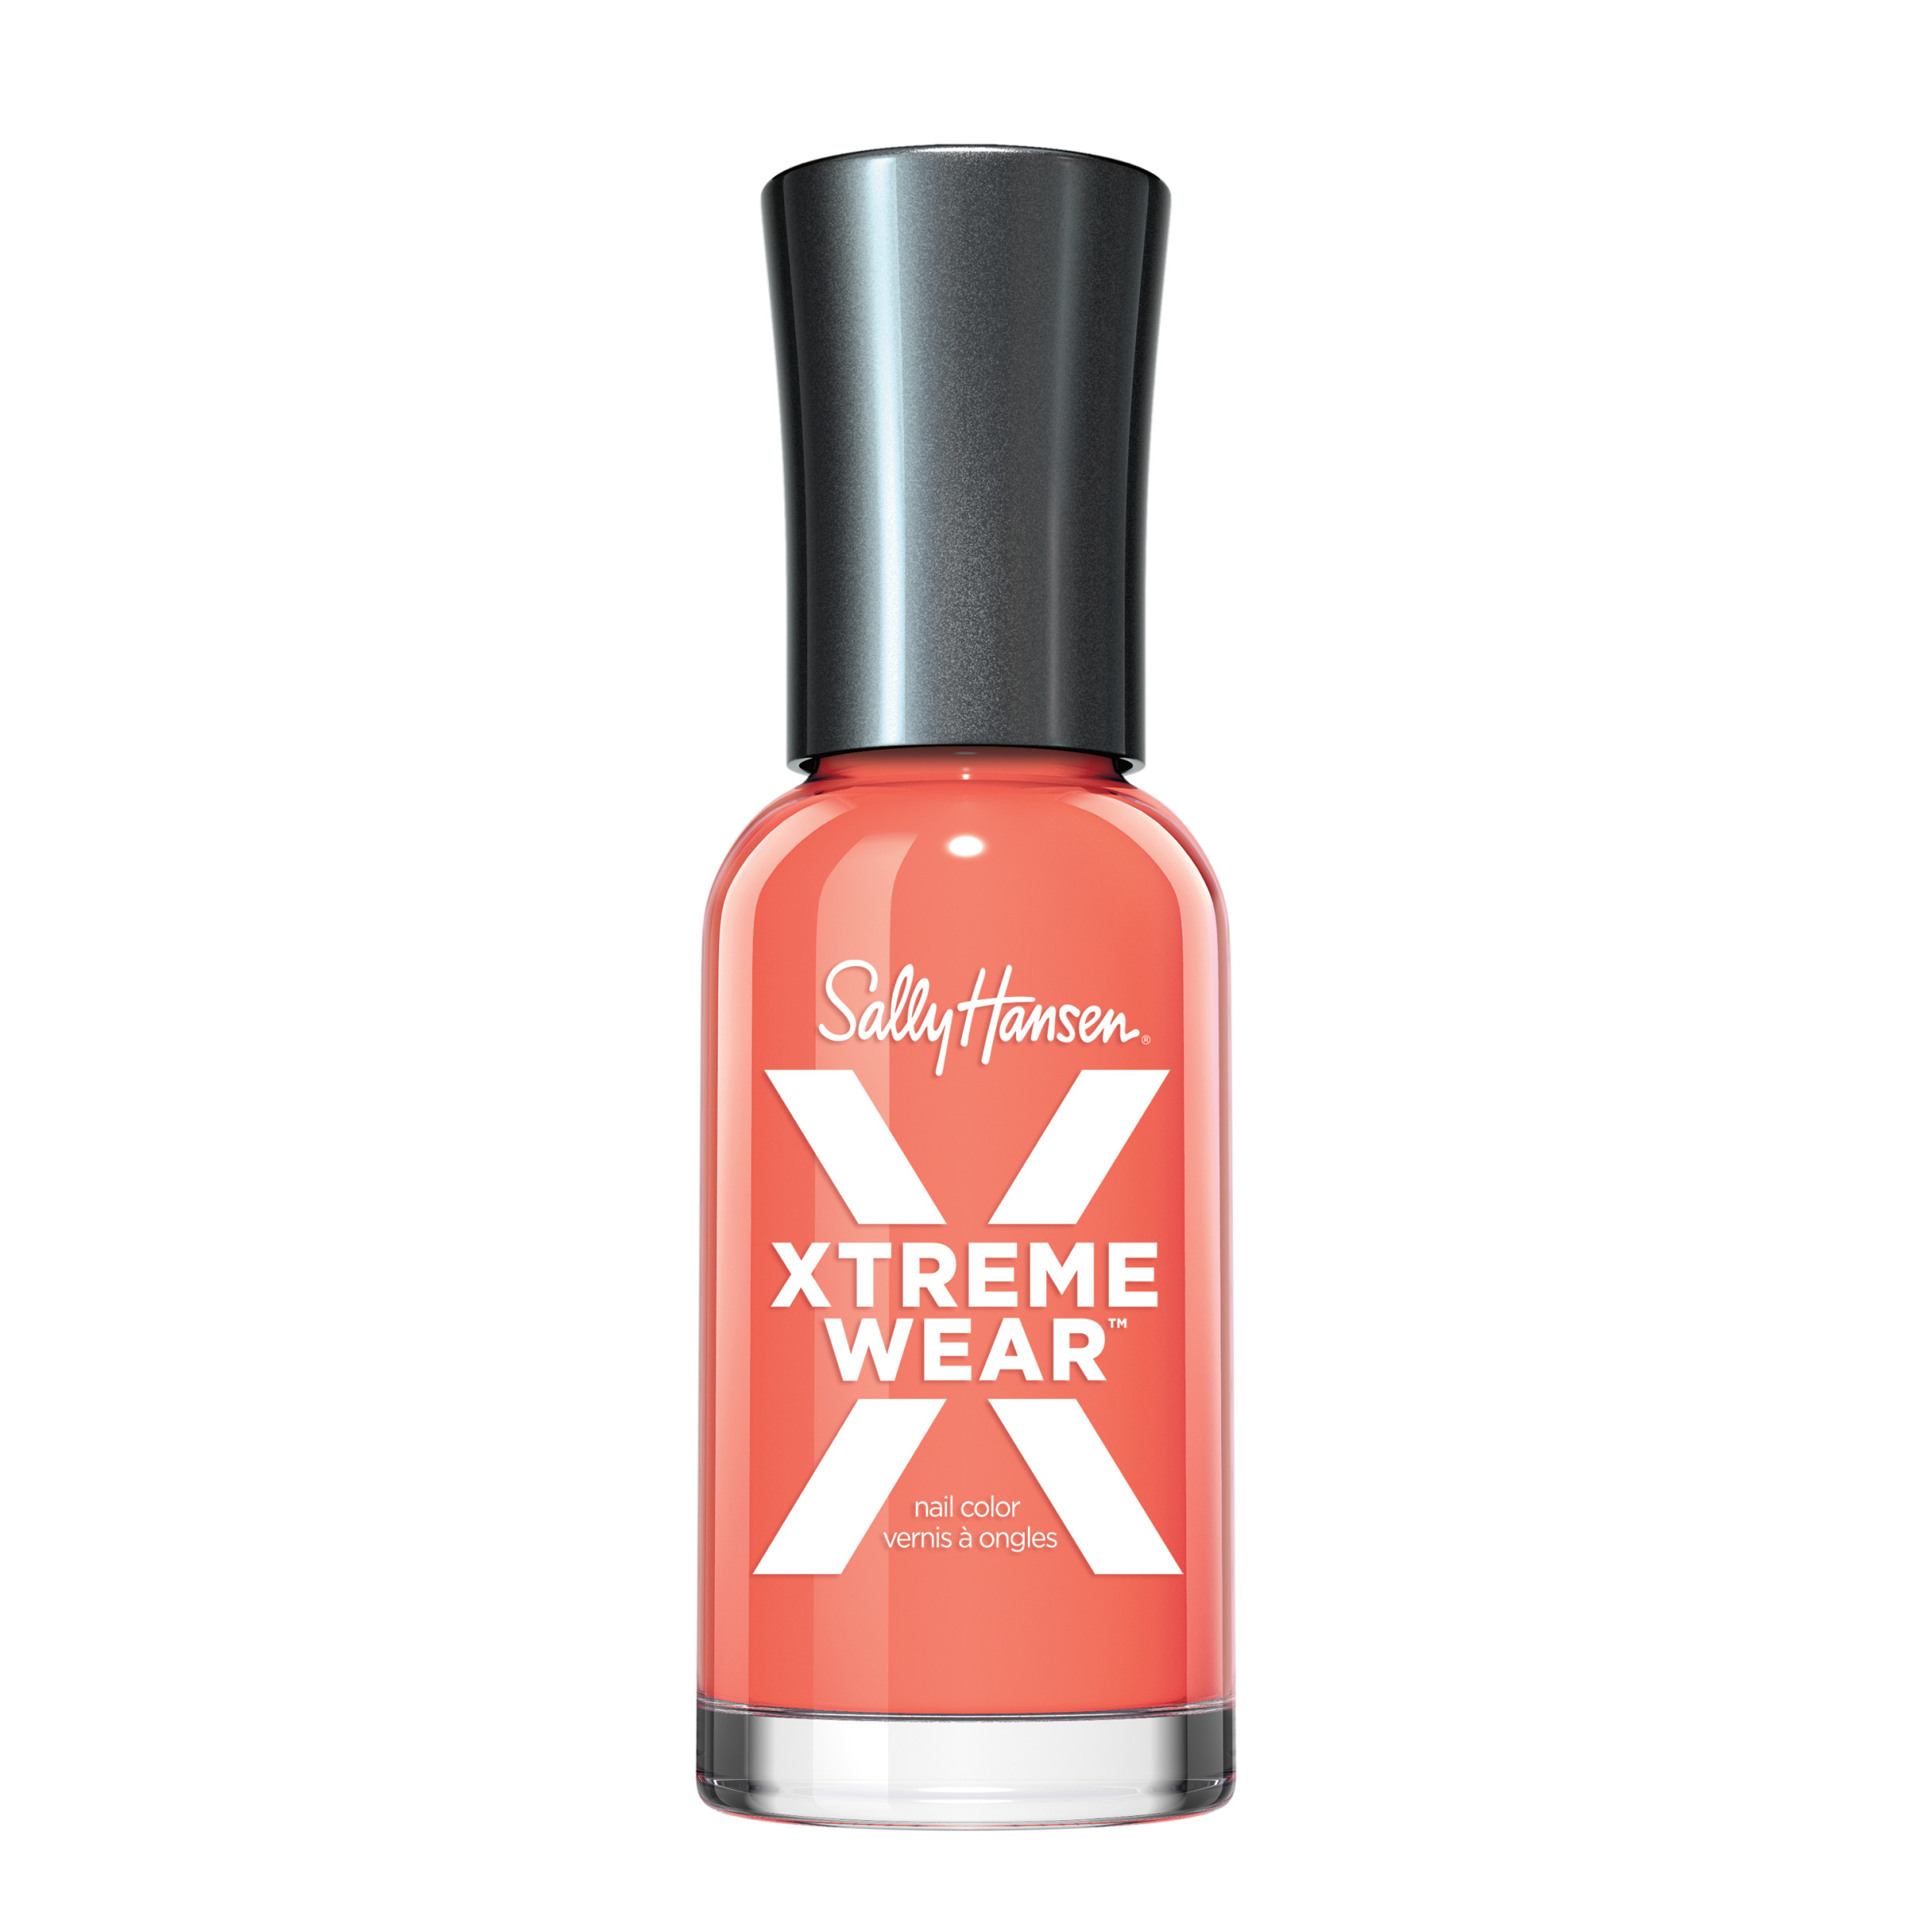 Sally Hansen Xtreme Wear Nail Polish, Pixie Peach, 0.4 oz, Chip Resistant, Bold Color - image 1 of 14